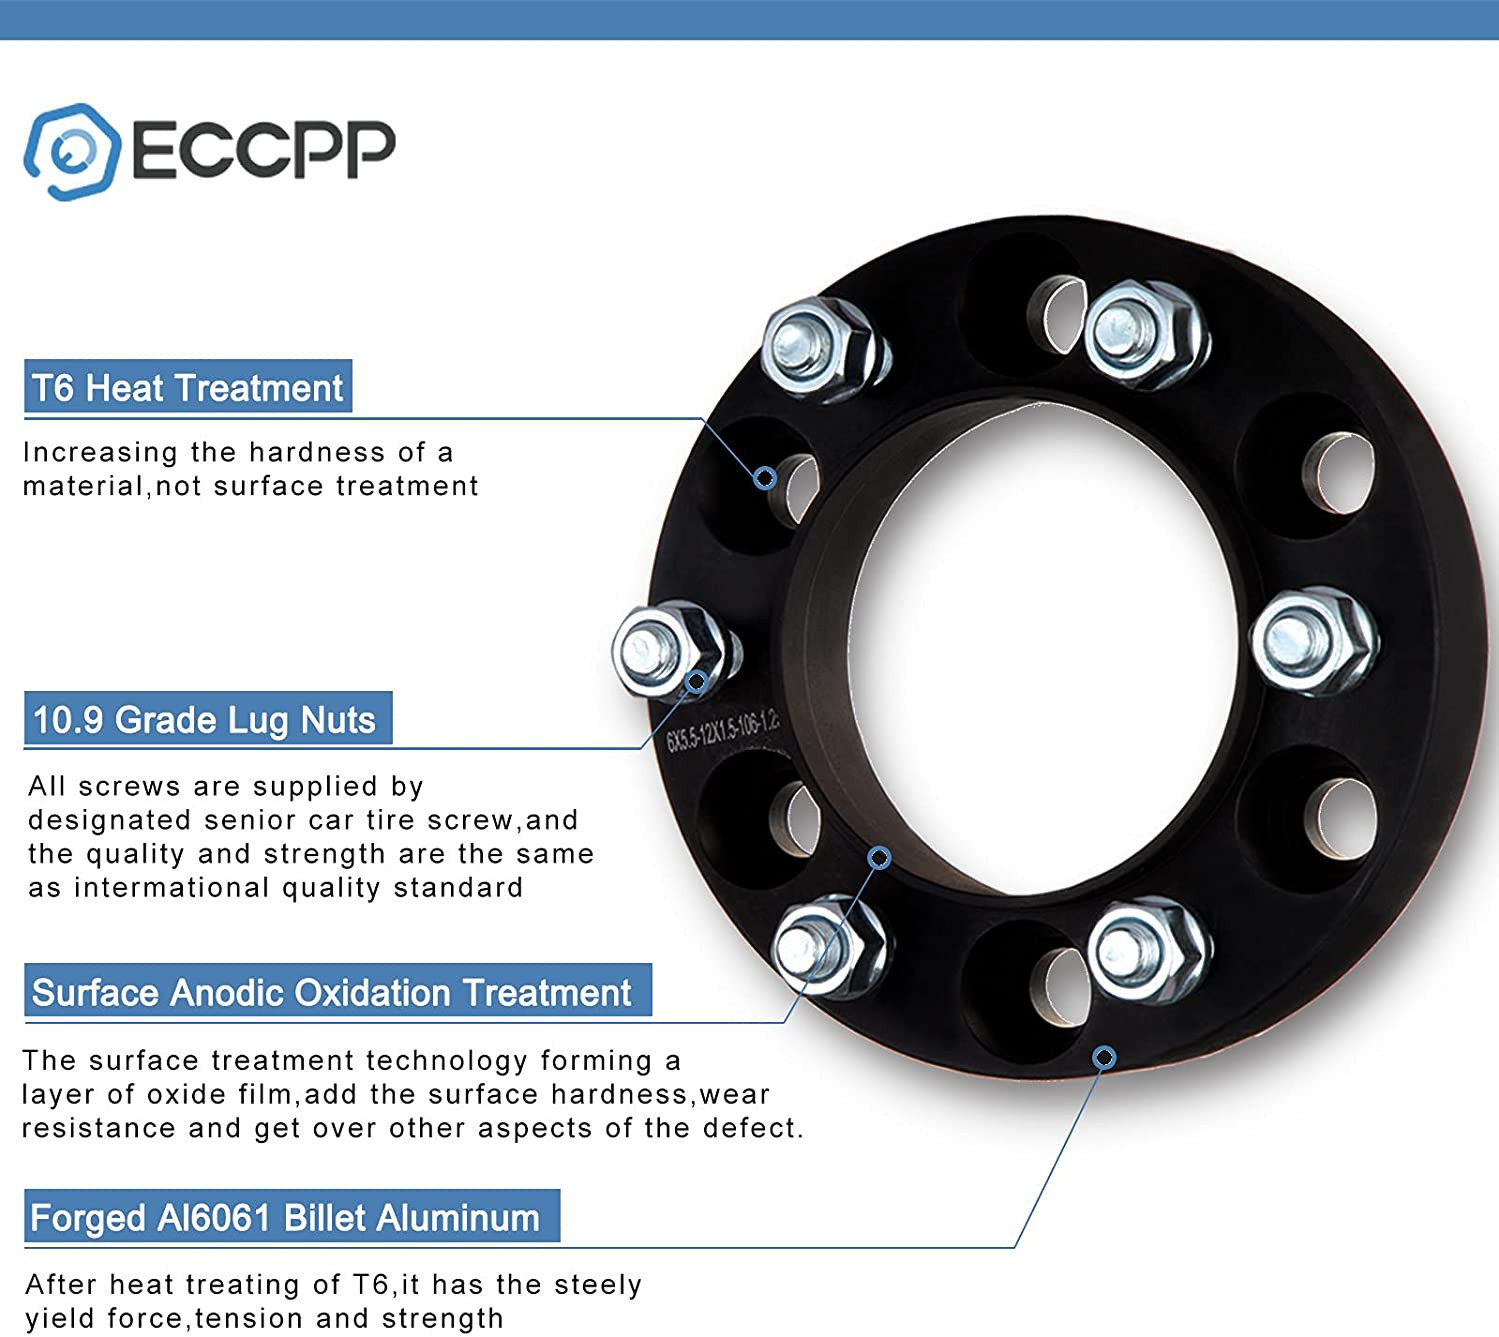 ECCPP 4x 5 lug Wheel Spacers Hubcentric 5x4.75 to 5x4.75 3 Wheel Spacers Adapter 5 Lug Fits for Ch-evr-olet Camaro for Ch-ev-y Blazer for Cadillac XLR with 12x1.5 Studs